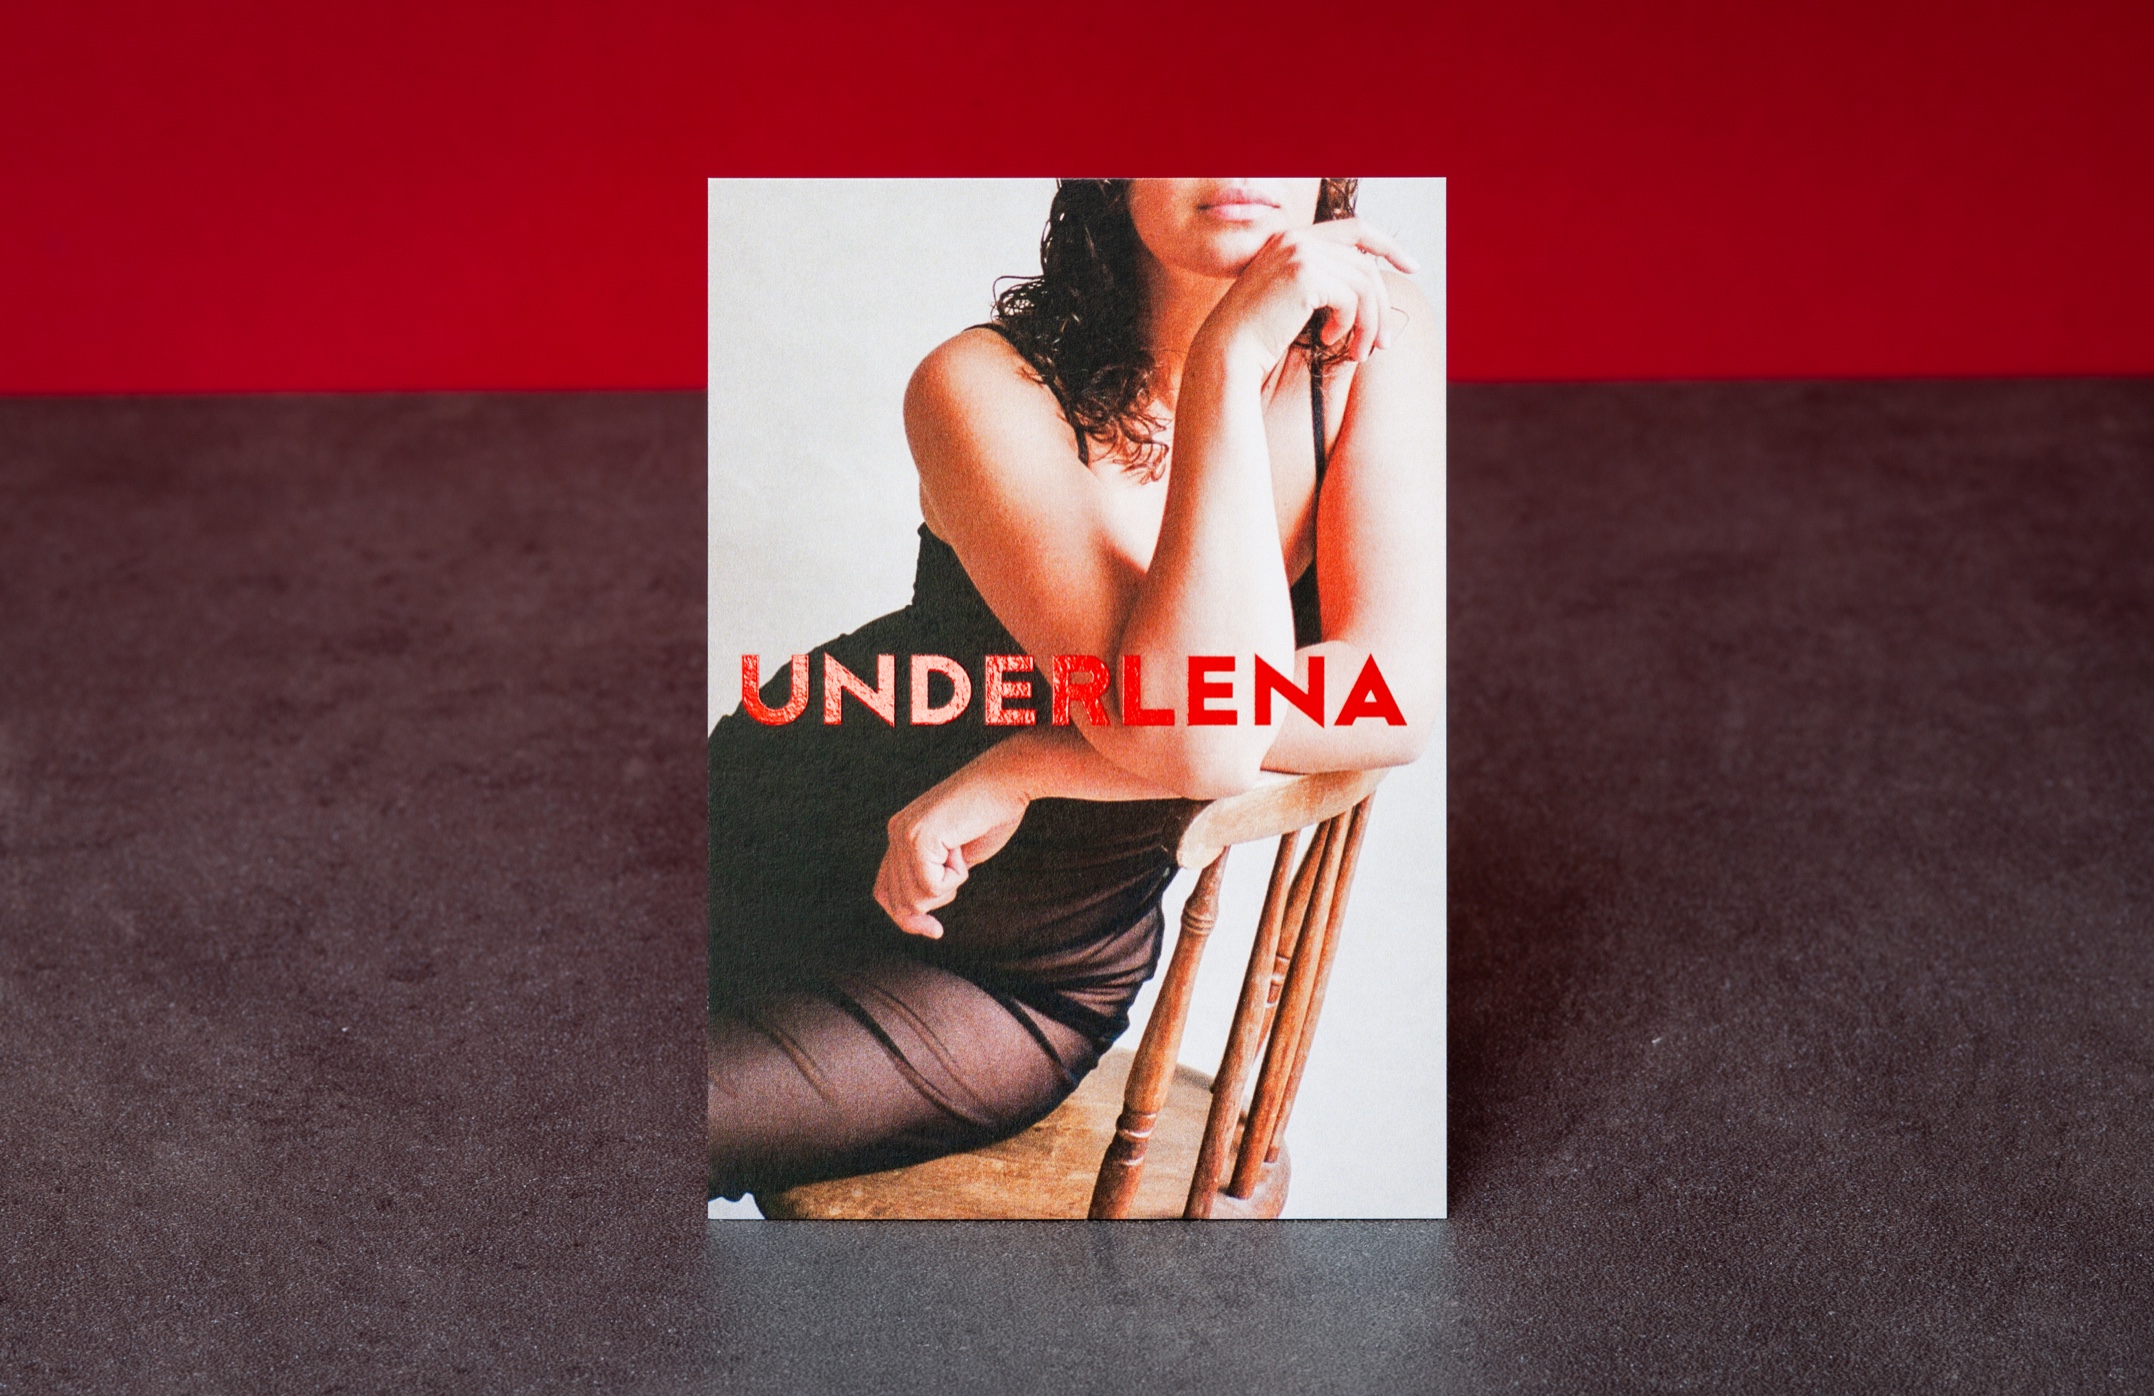 Exquisite Compliments: Printing Underlena's Striking Compliment Slips